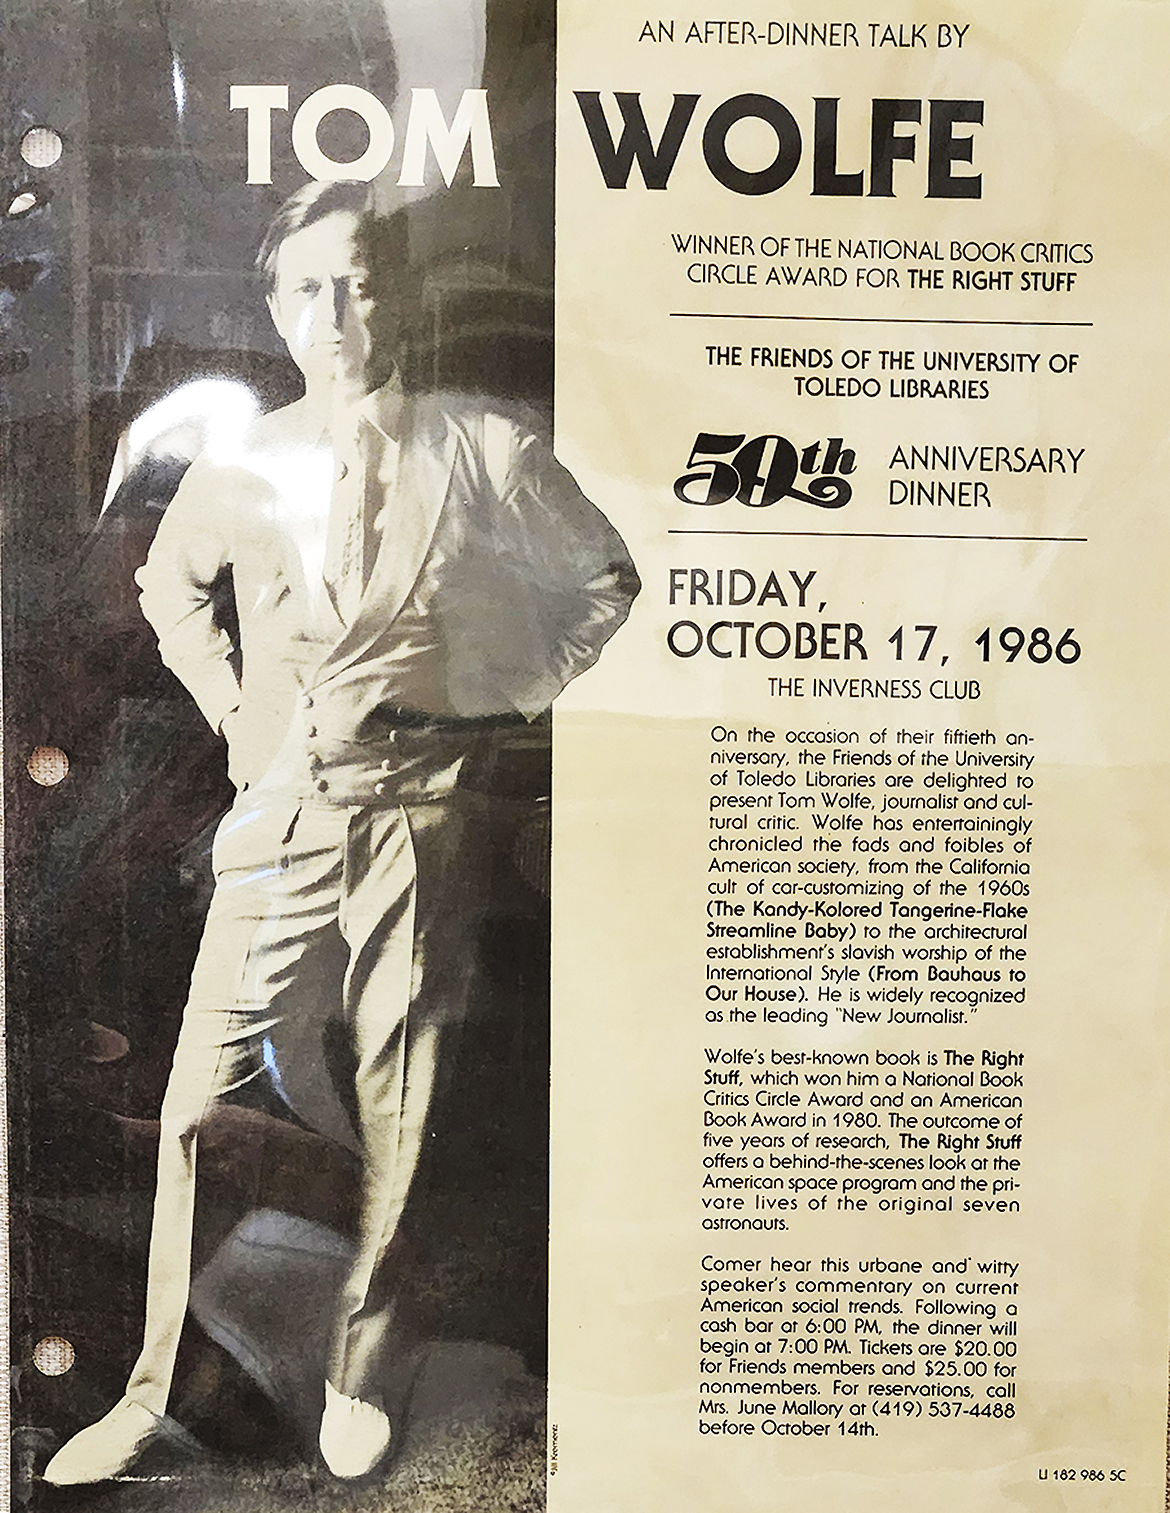 Flyer announcing the 50th anniversay dinner of The Friends of The University of Toledo Libraries, featuring Tom Wolfe, October 17, 1986